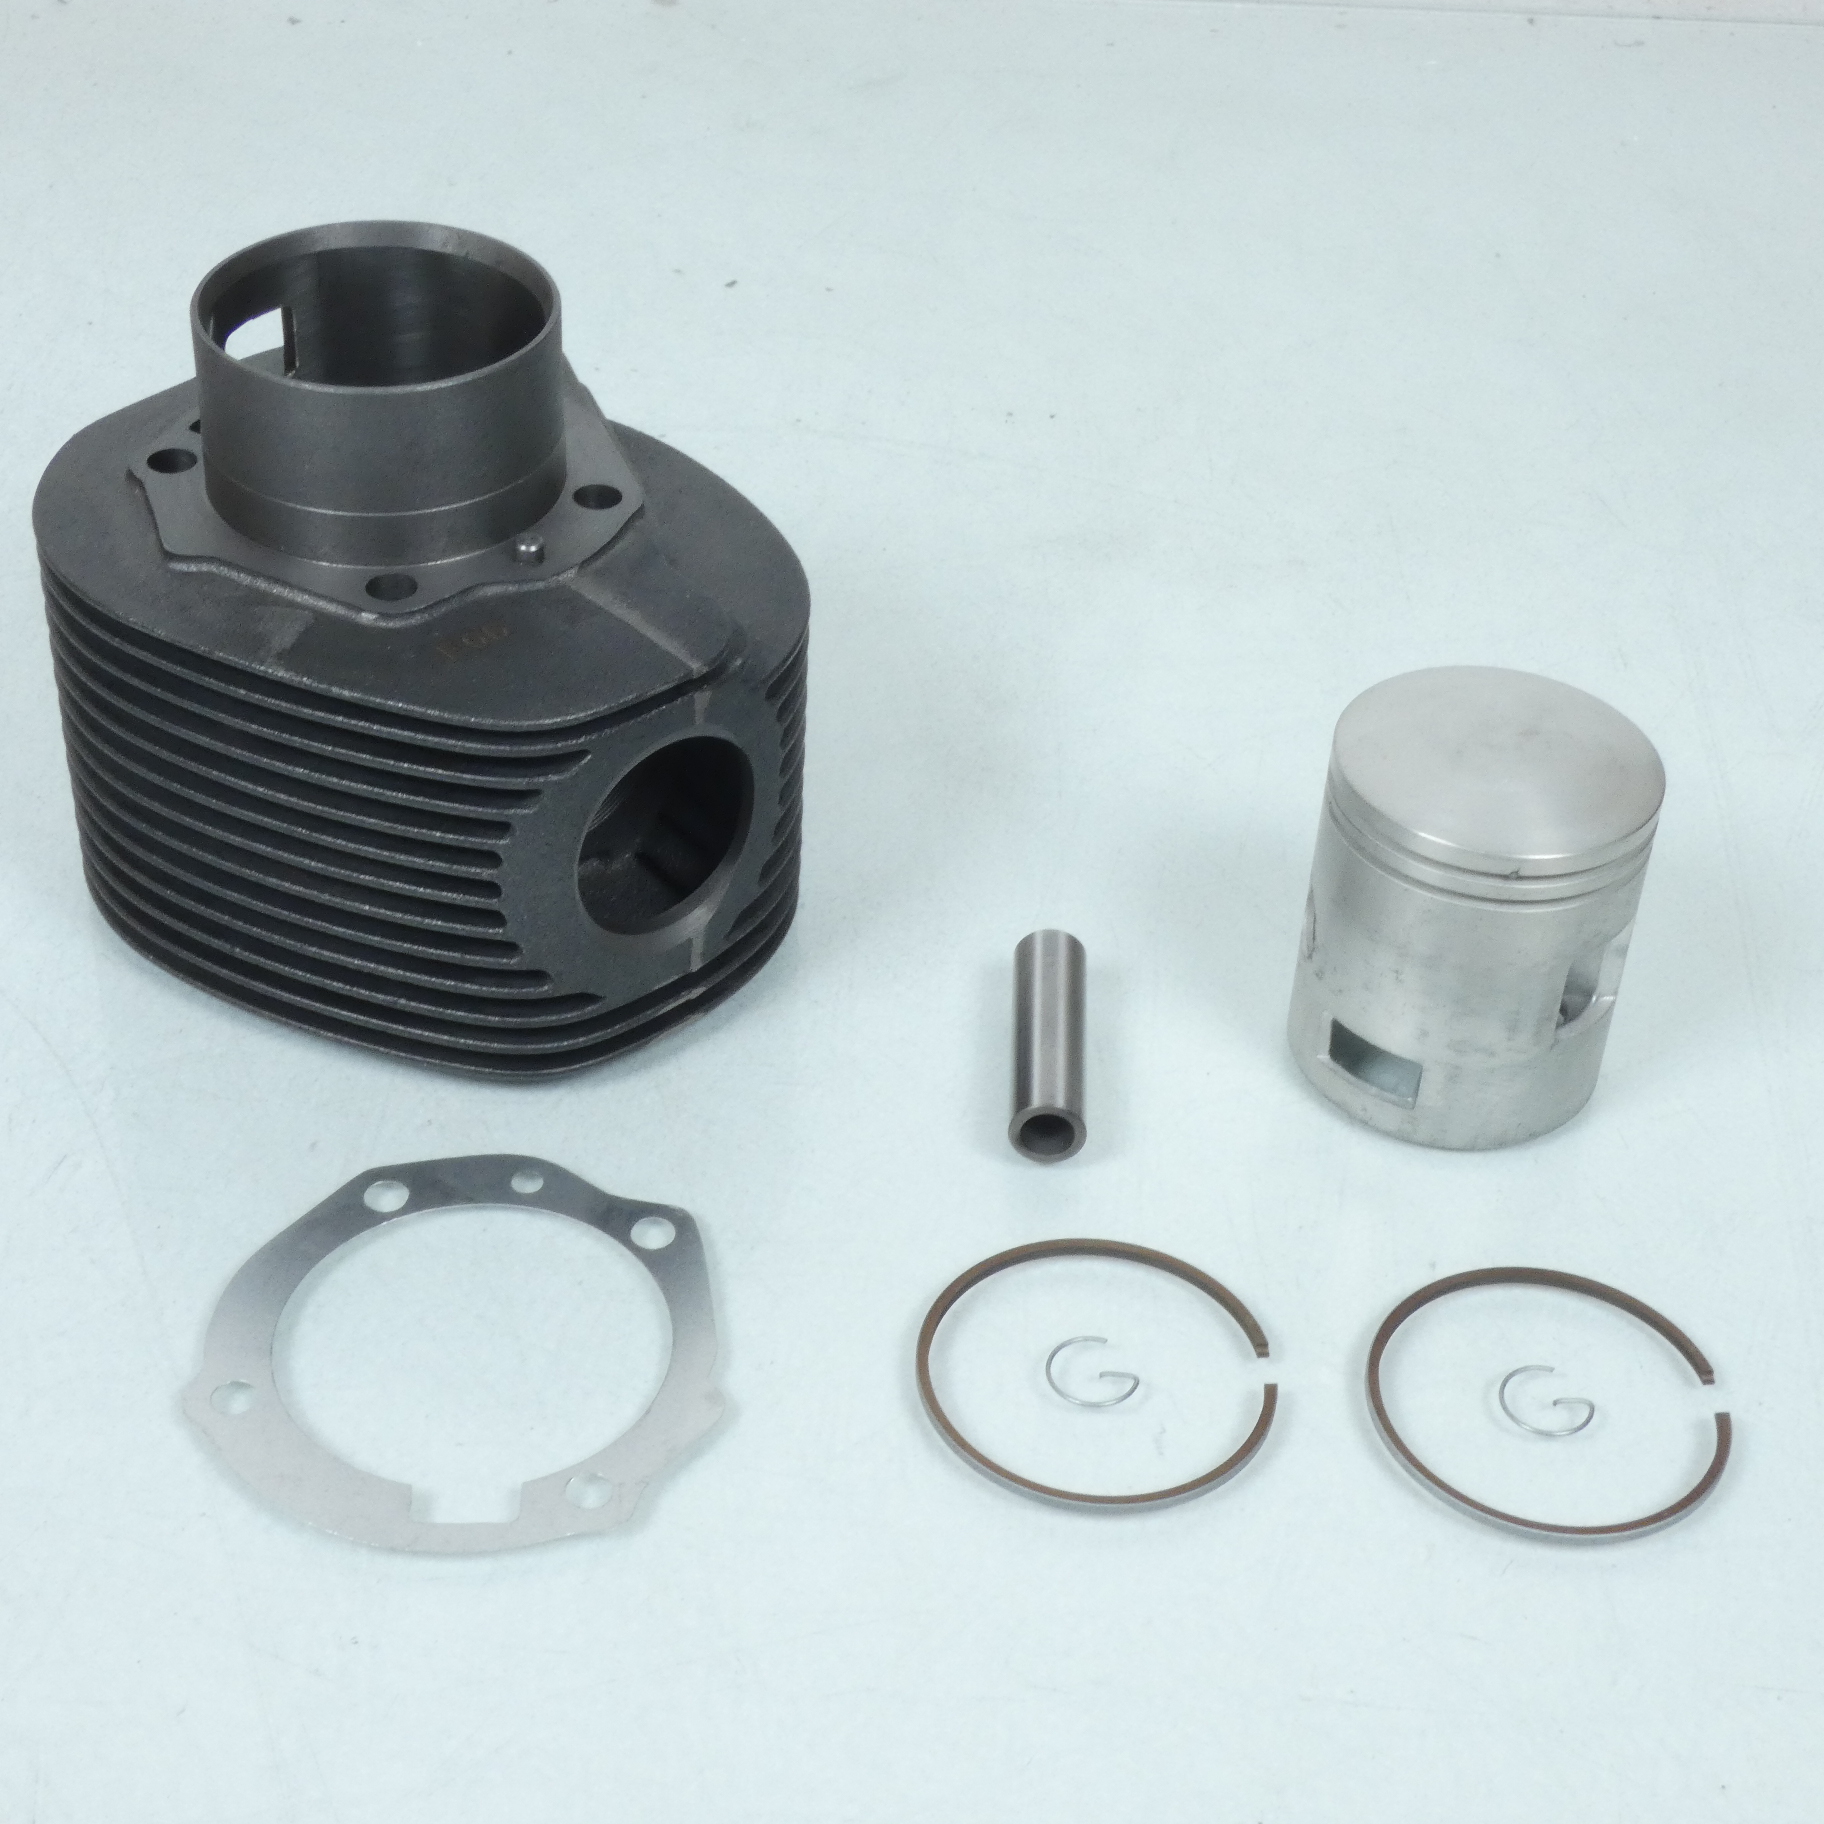 Kit Cylindre piston Ø66.5mm P2R pour scooter Piaggio 200 Cosa Axe Ø16mm L58mm